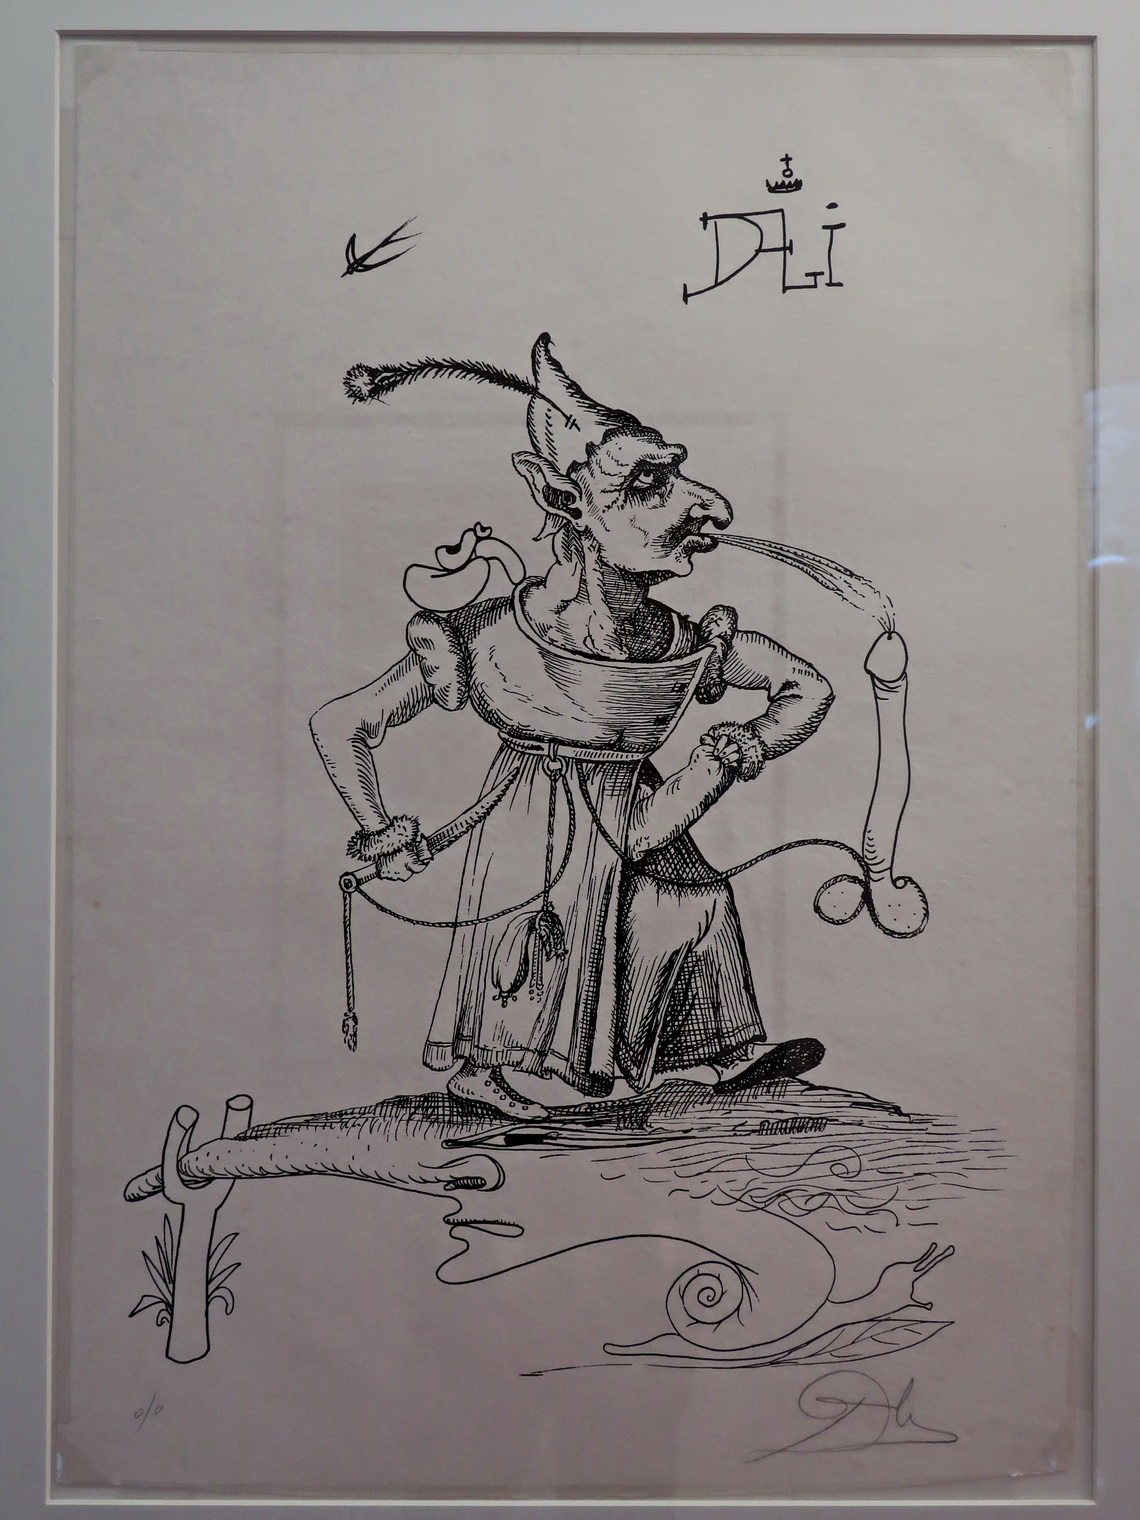 Typical sketch of Salvador Dali - maybe not loved by the catholic church